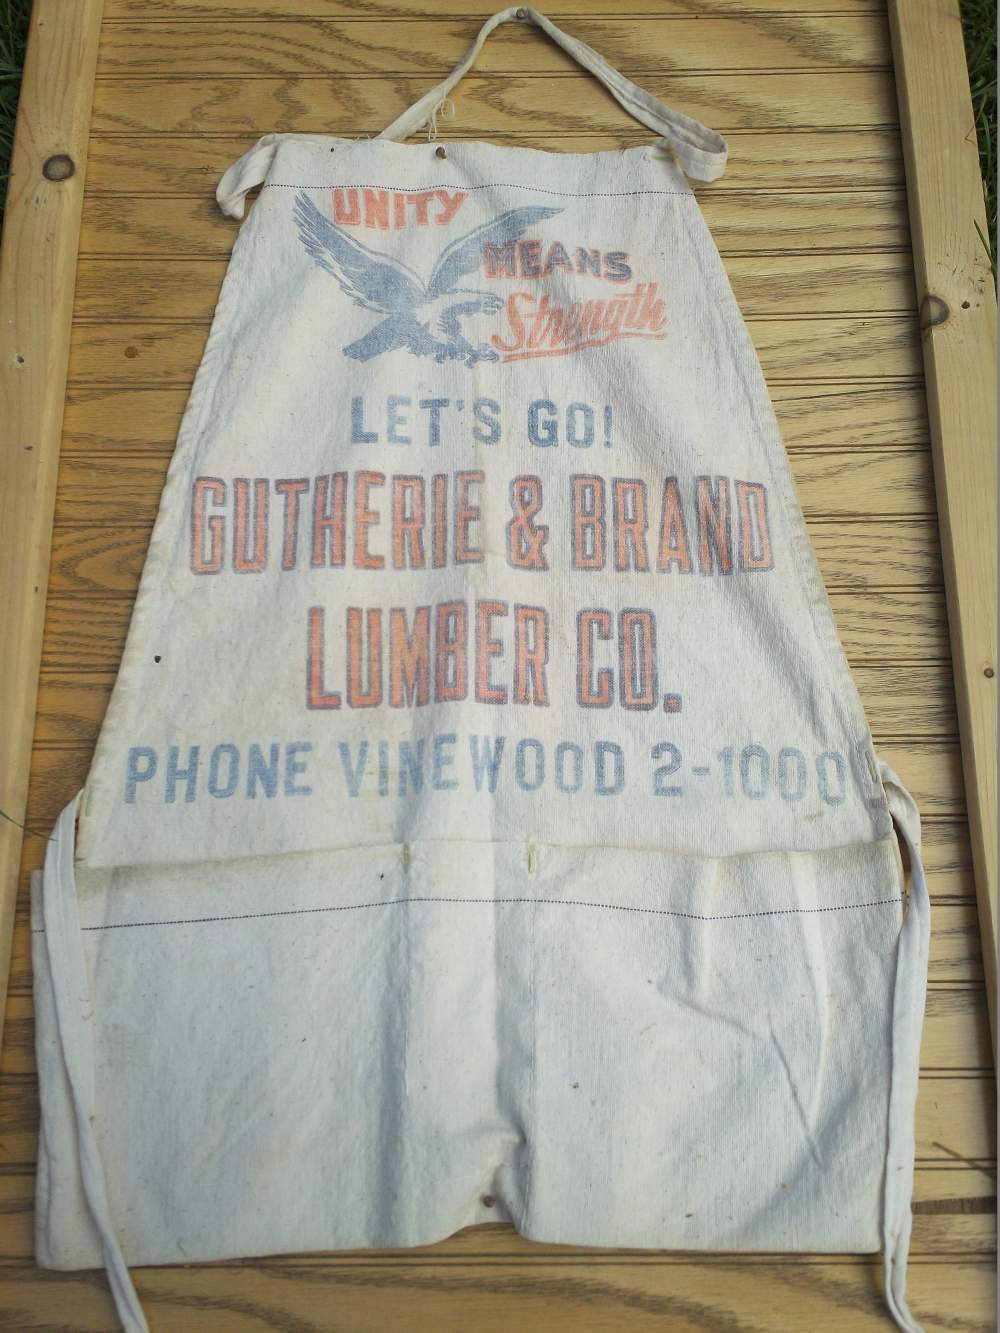 Name:  GLC Gutherie and Brand Lumber.jpg
Views: 800
Size:  142.7 KB